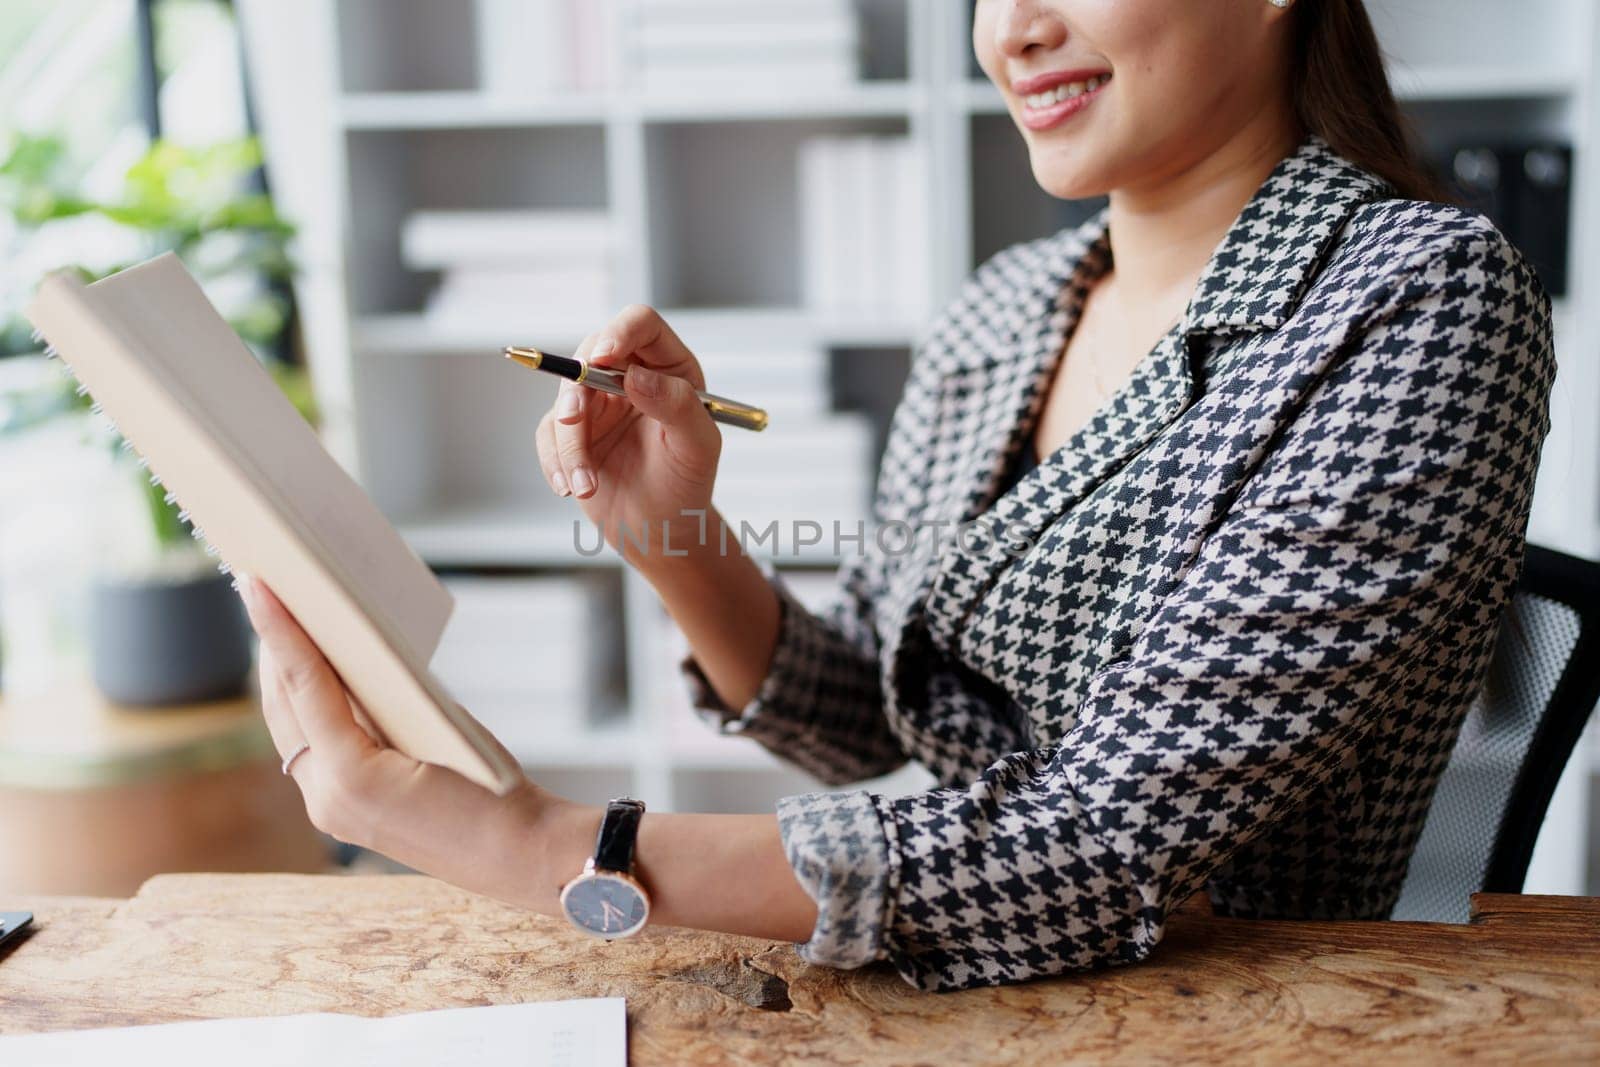 Portrait of a young Asian Woman showing a smiling face as she uses his notebook, computer and financial documents on her desk in the early morning hours.